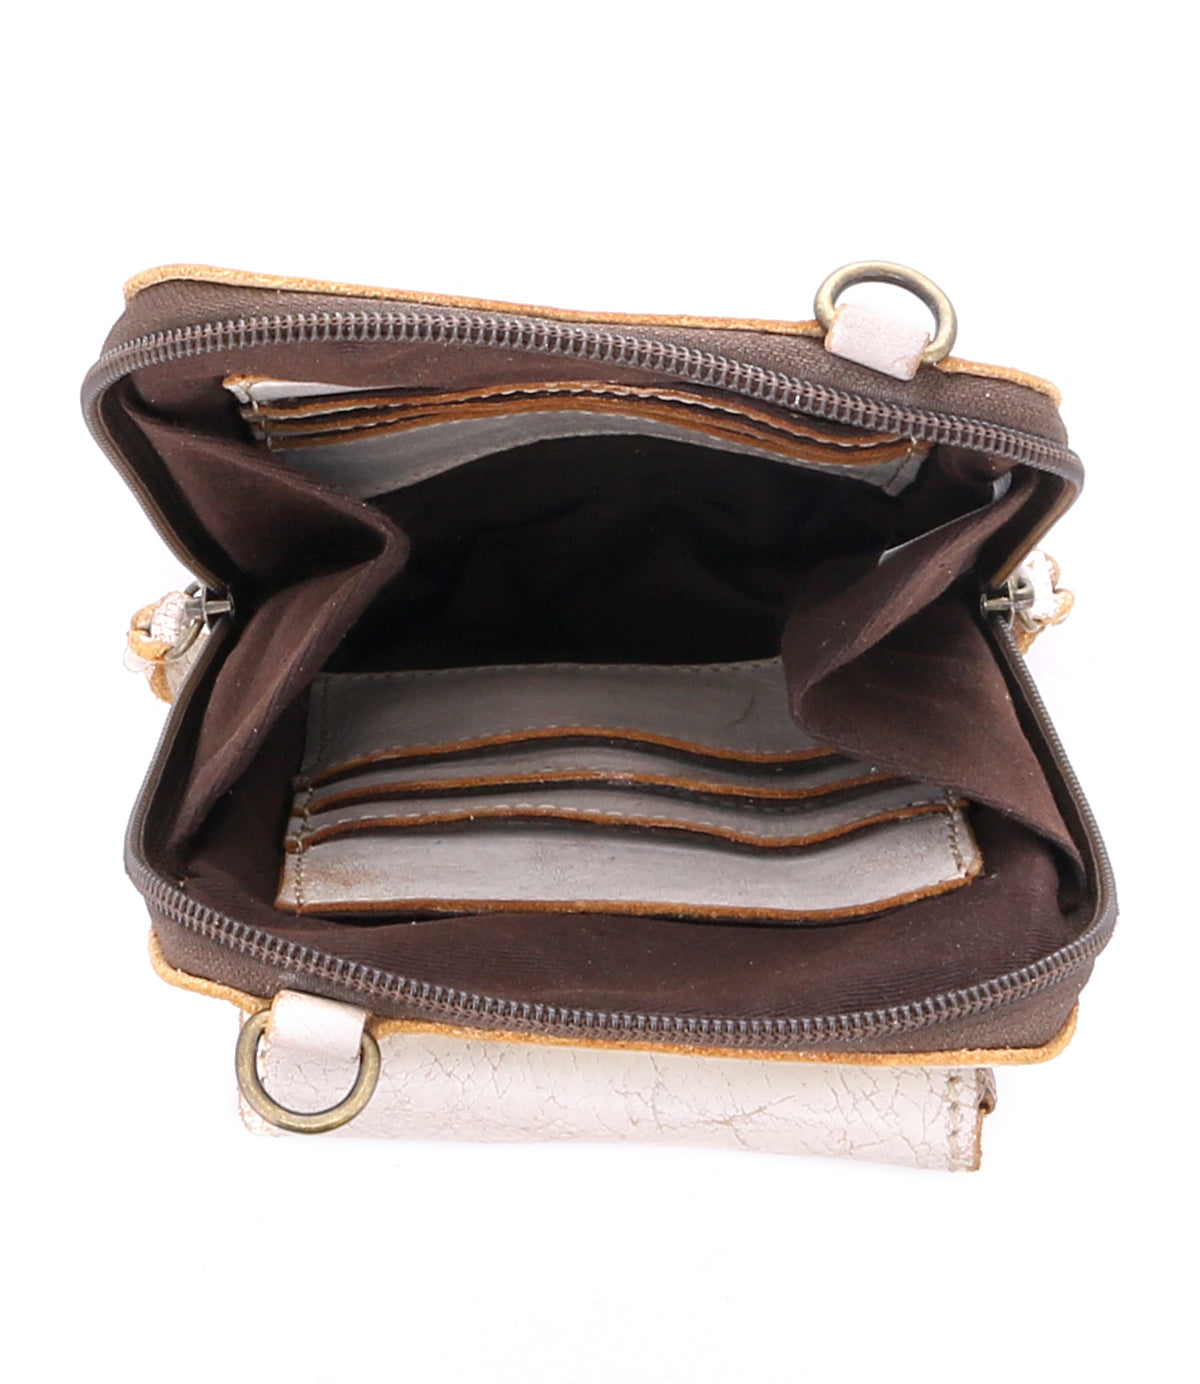 A Bed Stu purse with a zippered compartment.